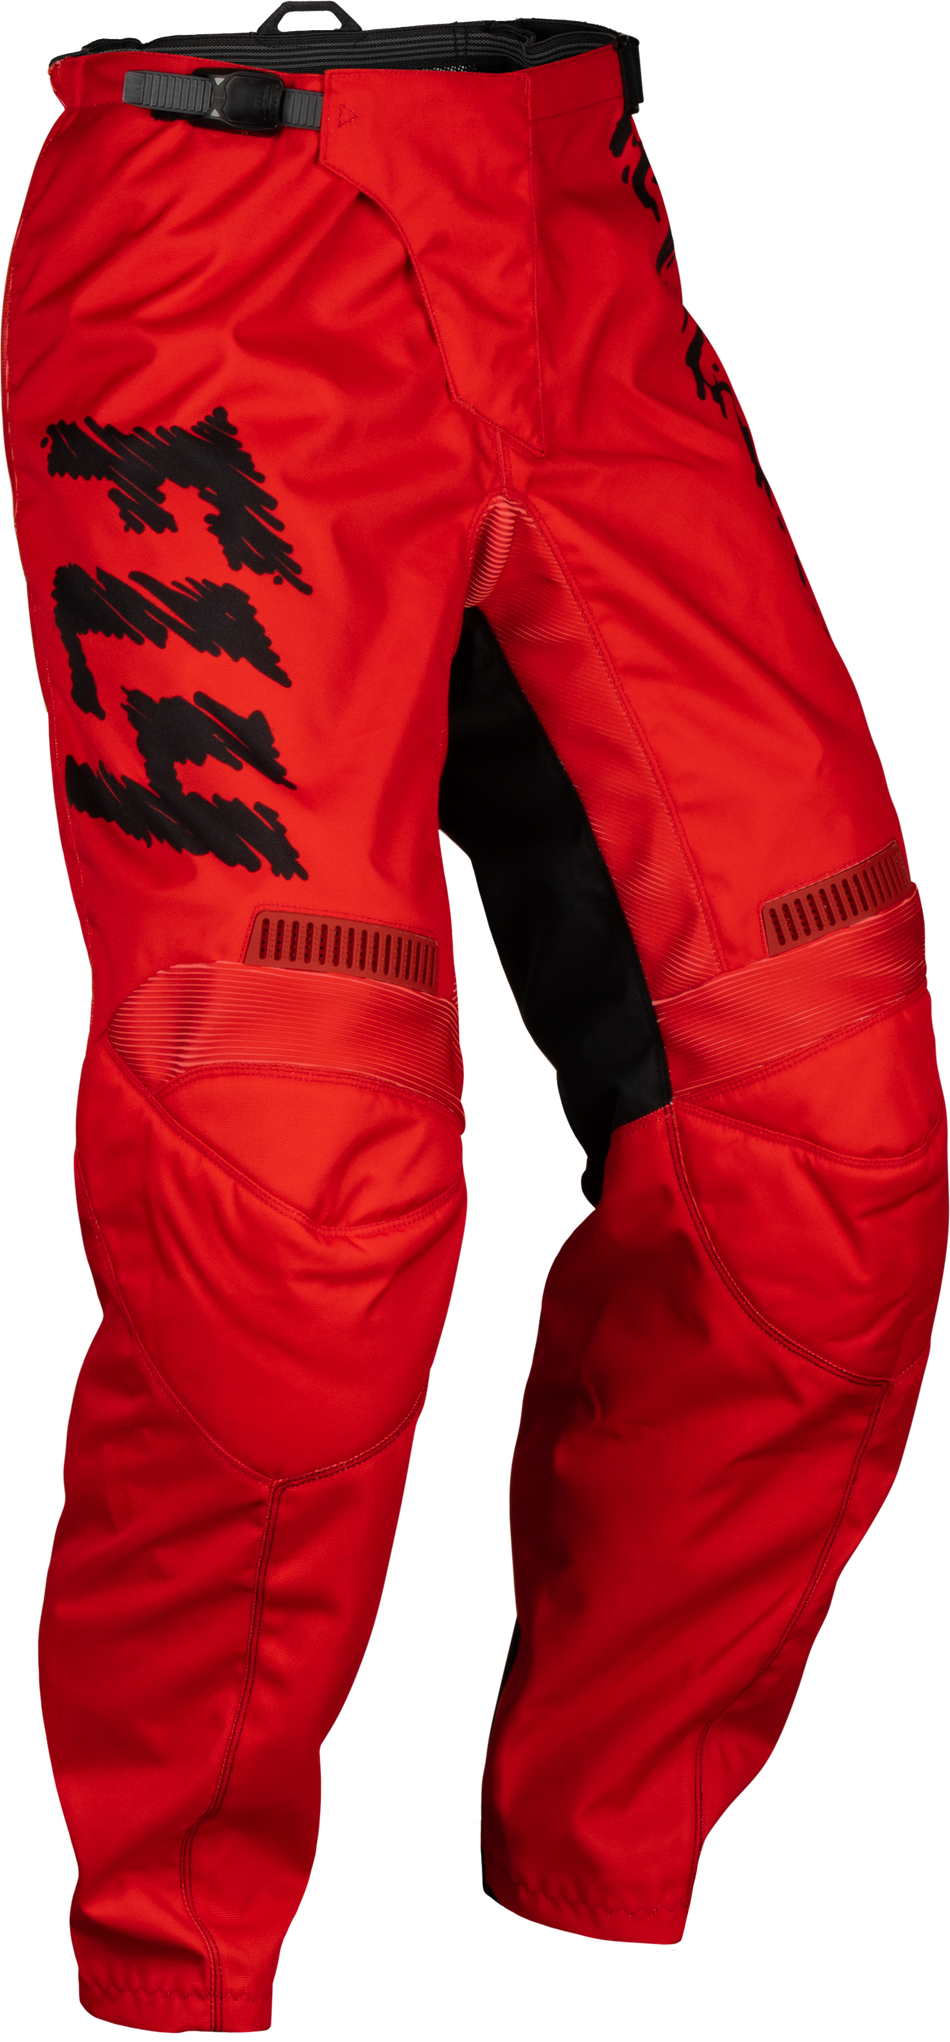 FLY RACING Youth F-16 Pants Red/Black/Grey Sz 26 377-23226